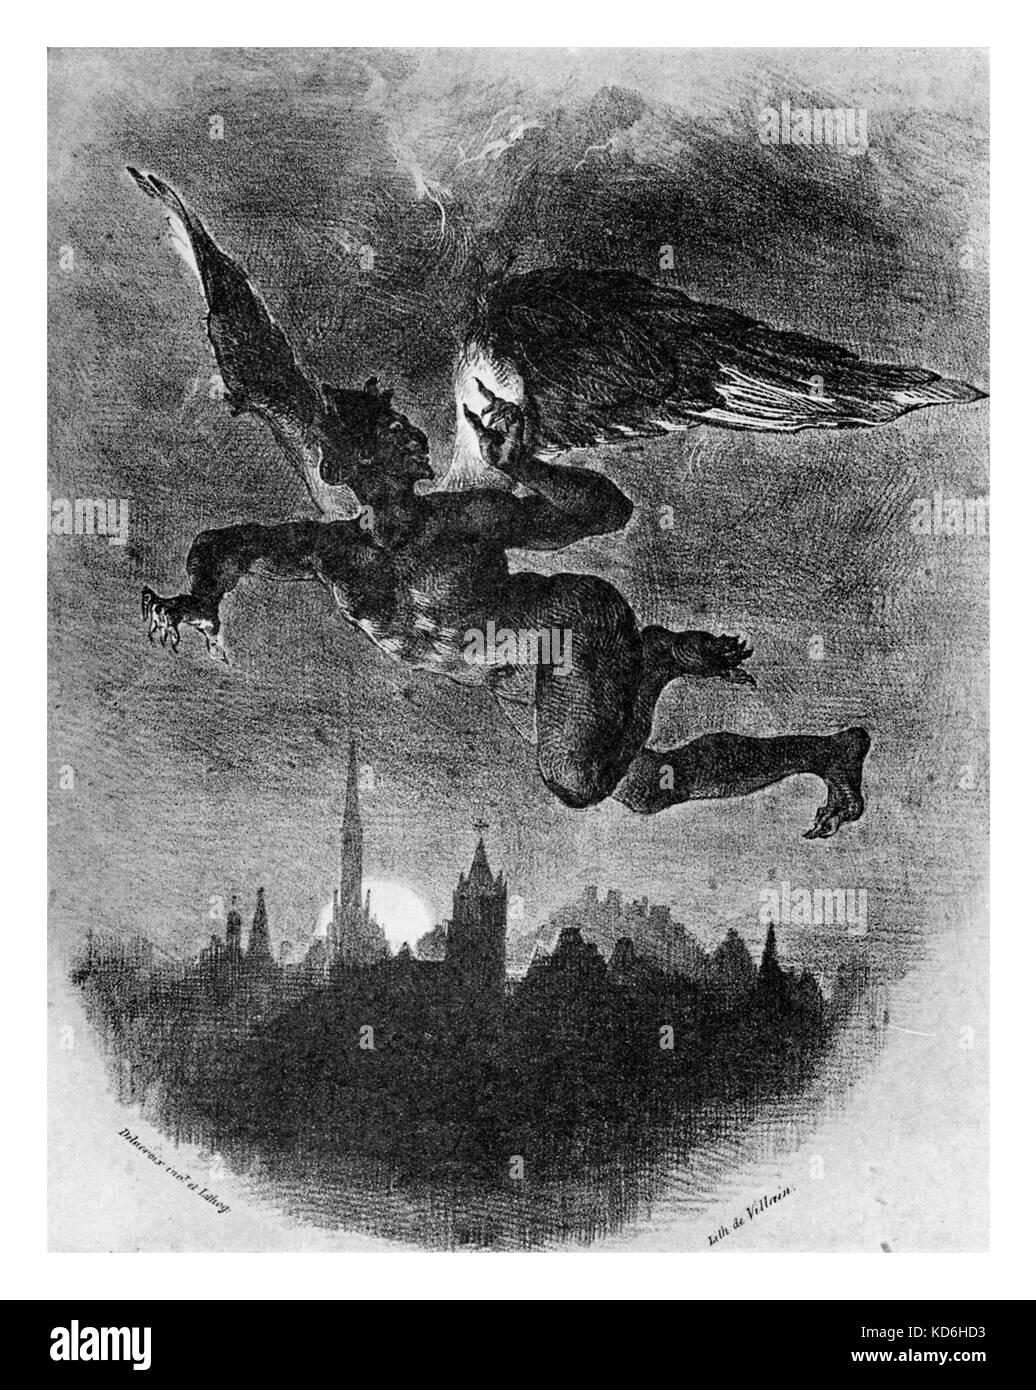 Satan flying over the city at night. Lithograph by Delacroix. Damnation of Faust ('La Damnation de Faust', 1846) by Berlioz.    French composer, 1803-1869. Stock Photo